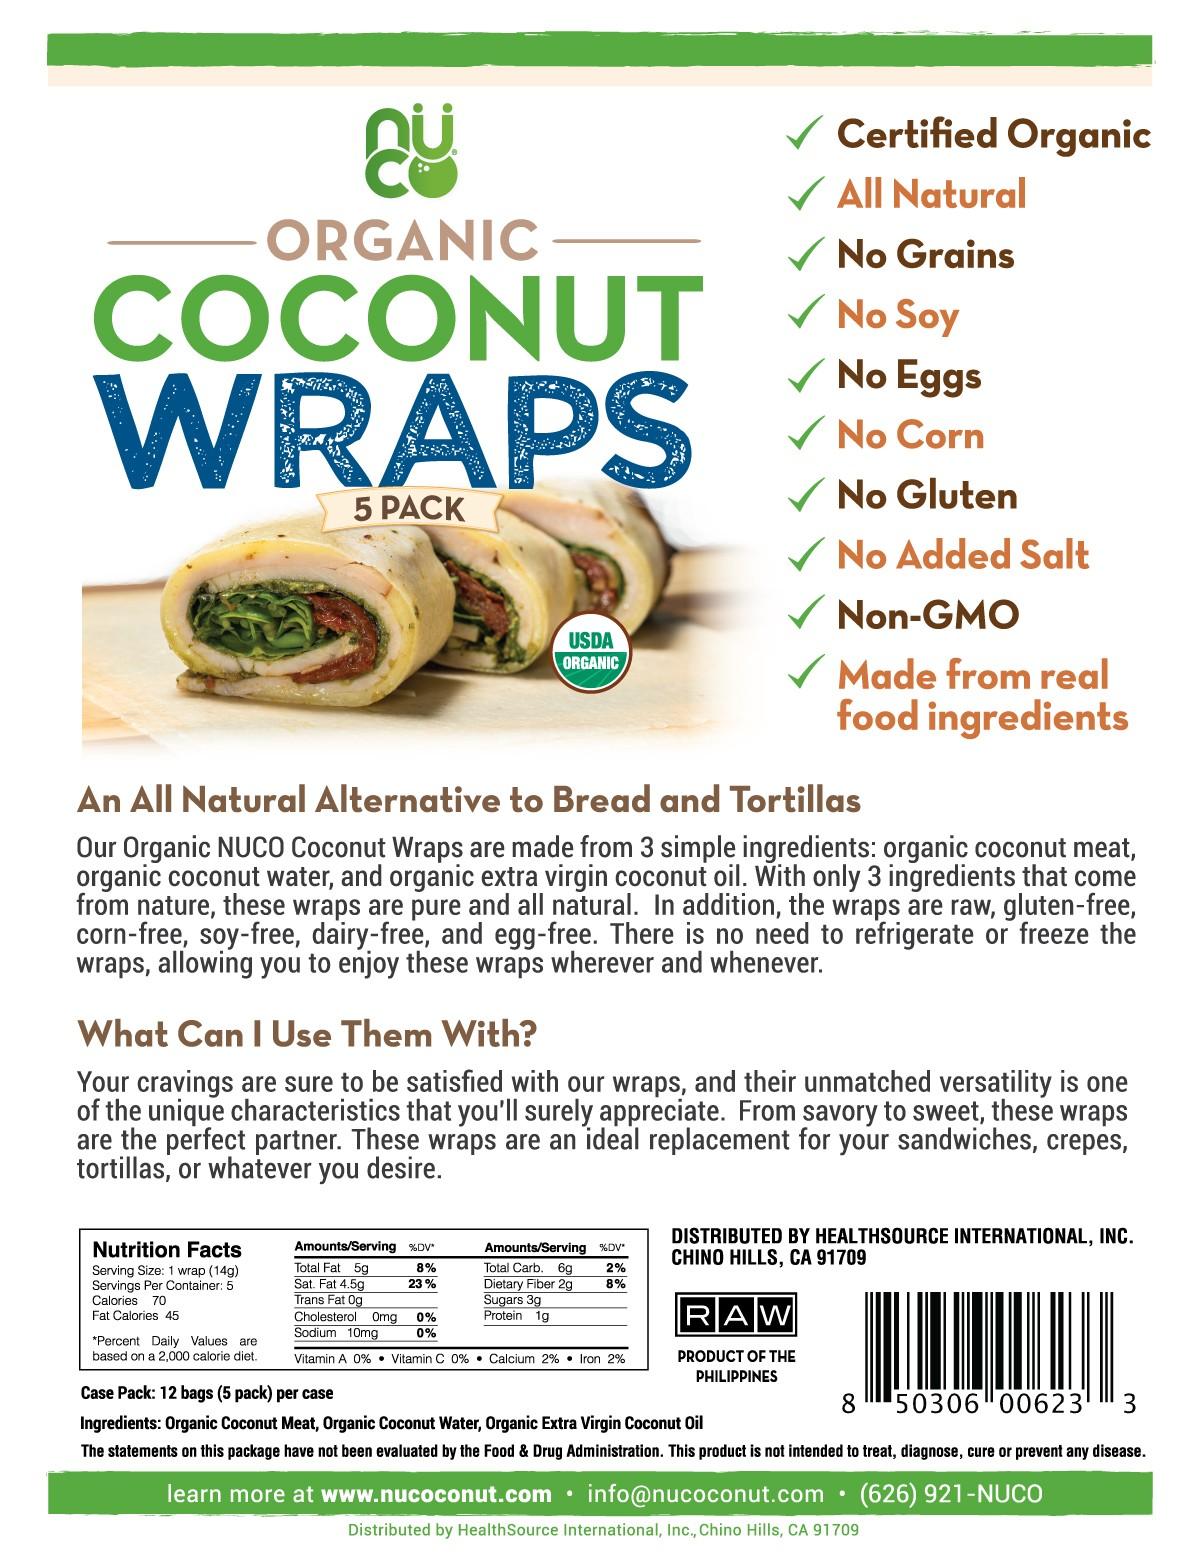 Looking to Buy NuCo Coconut Wraps. : Discover Where to Get These Tasty Wraps Near You